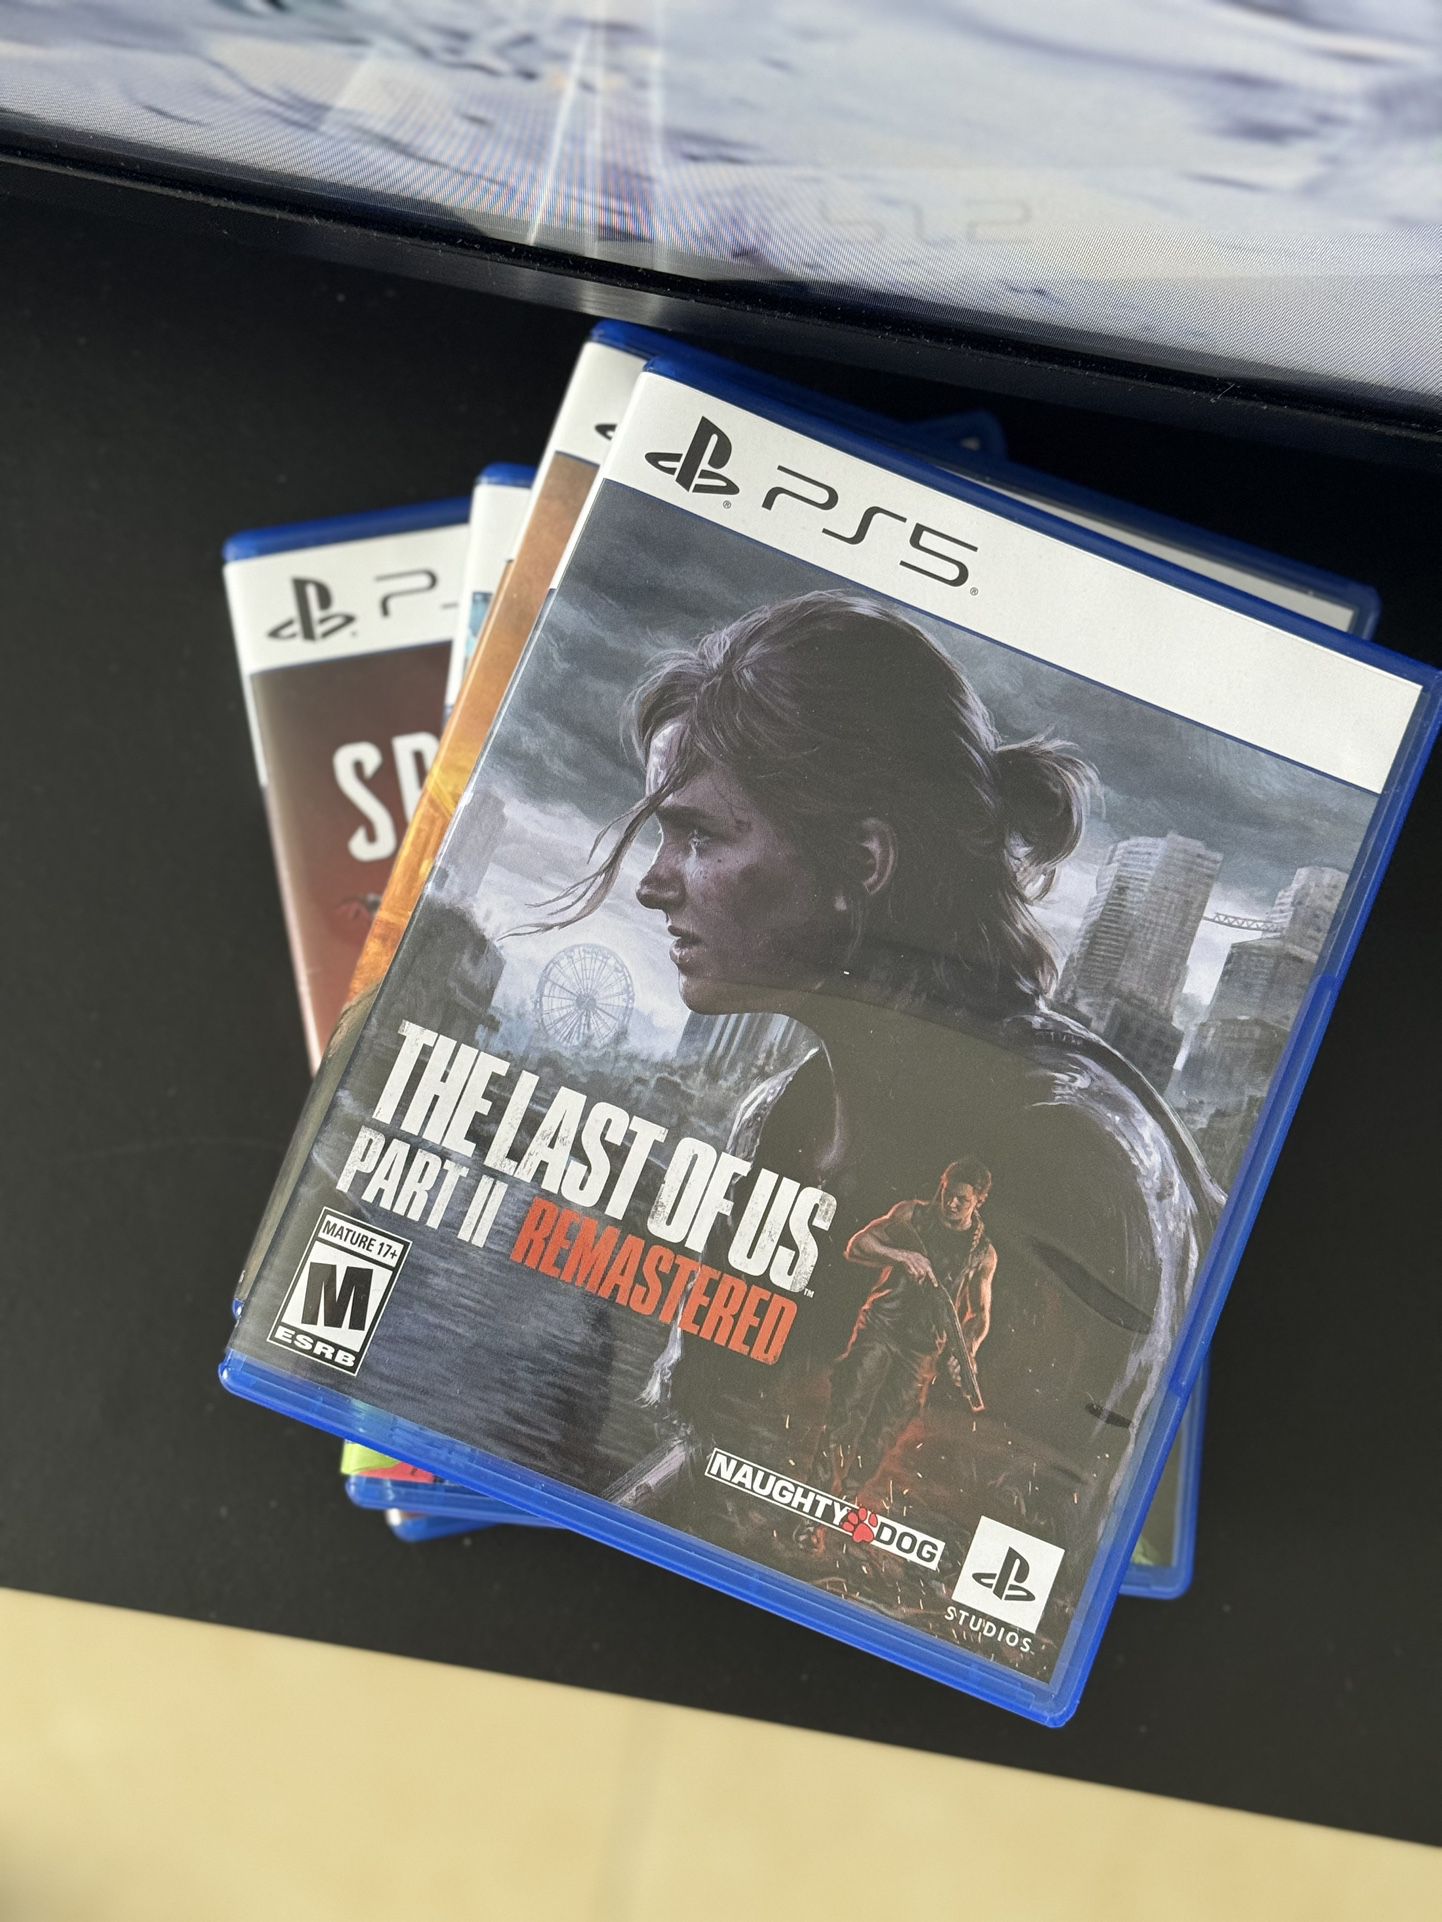 The Last Of Us Part 2 PS5